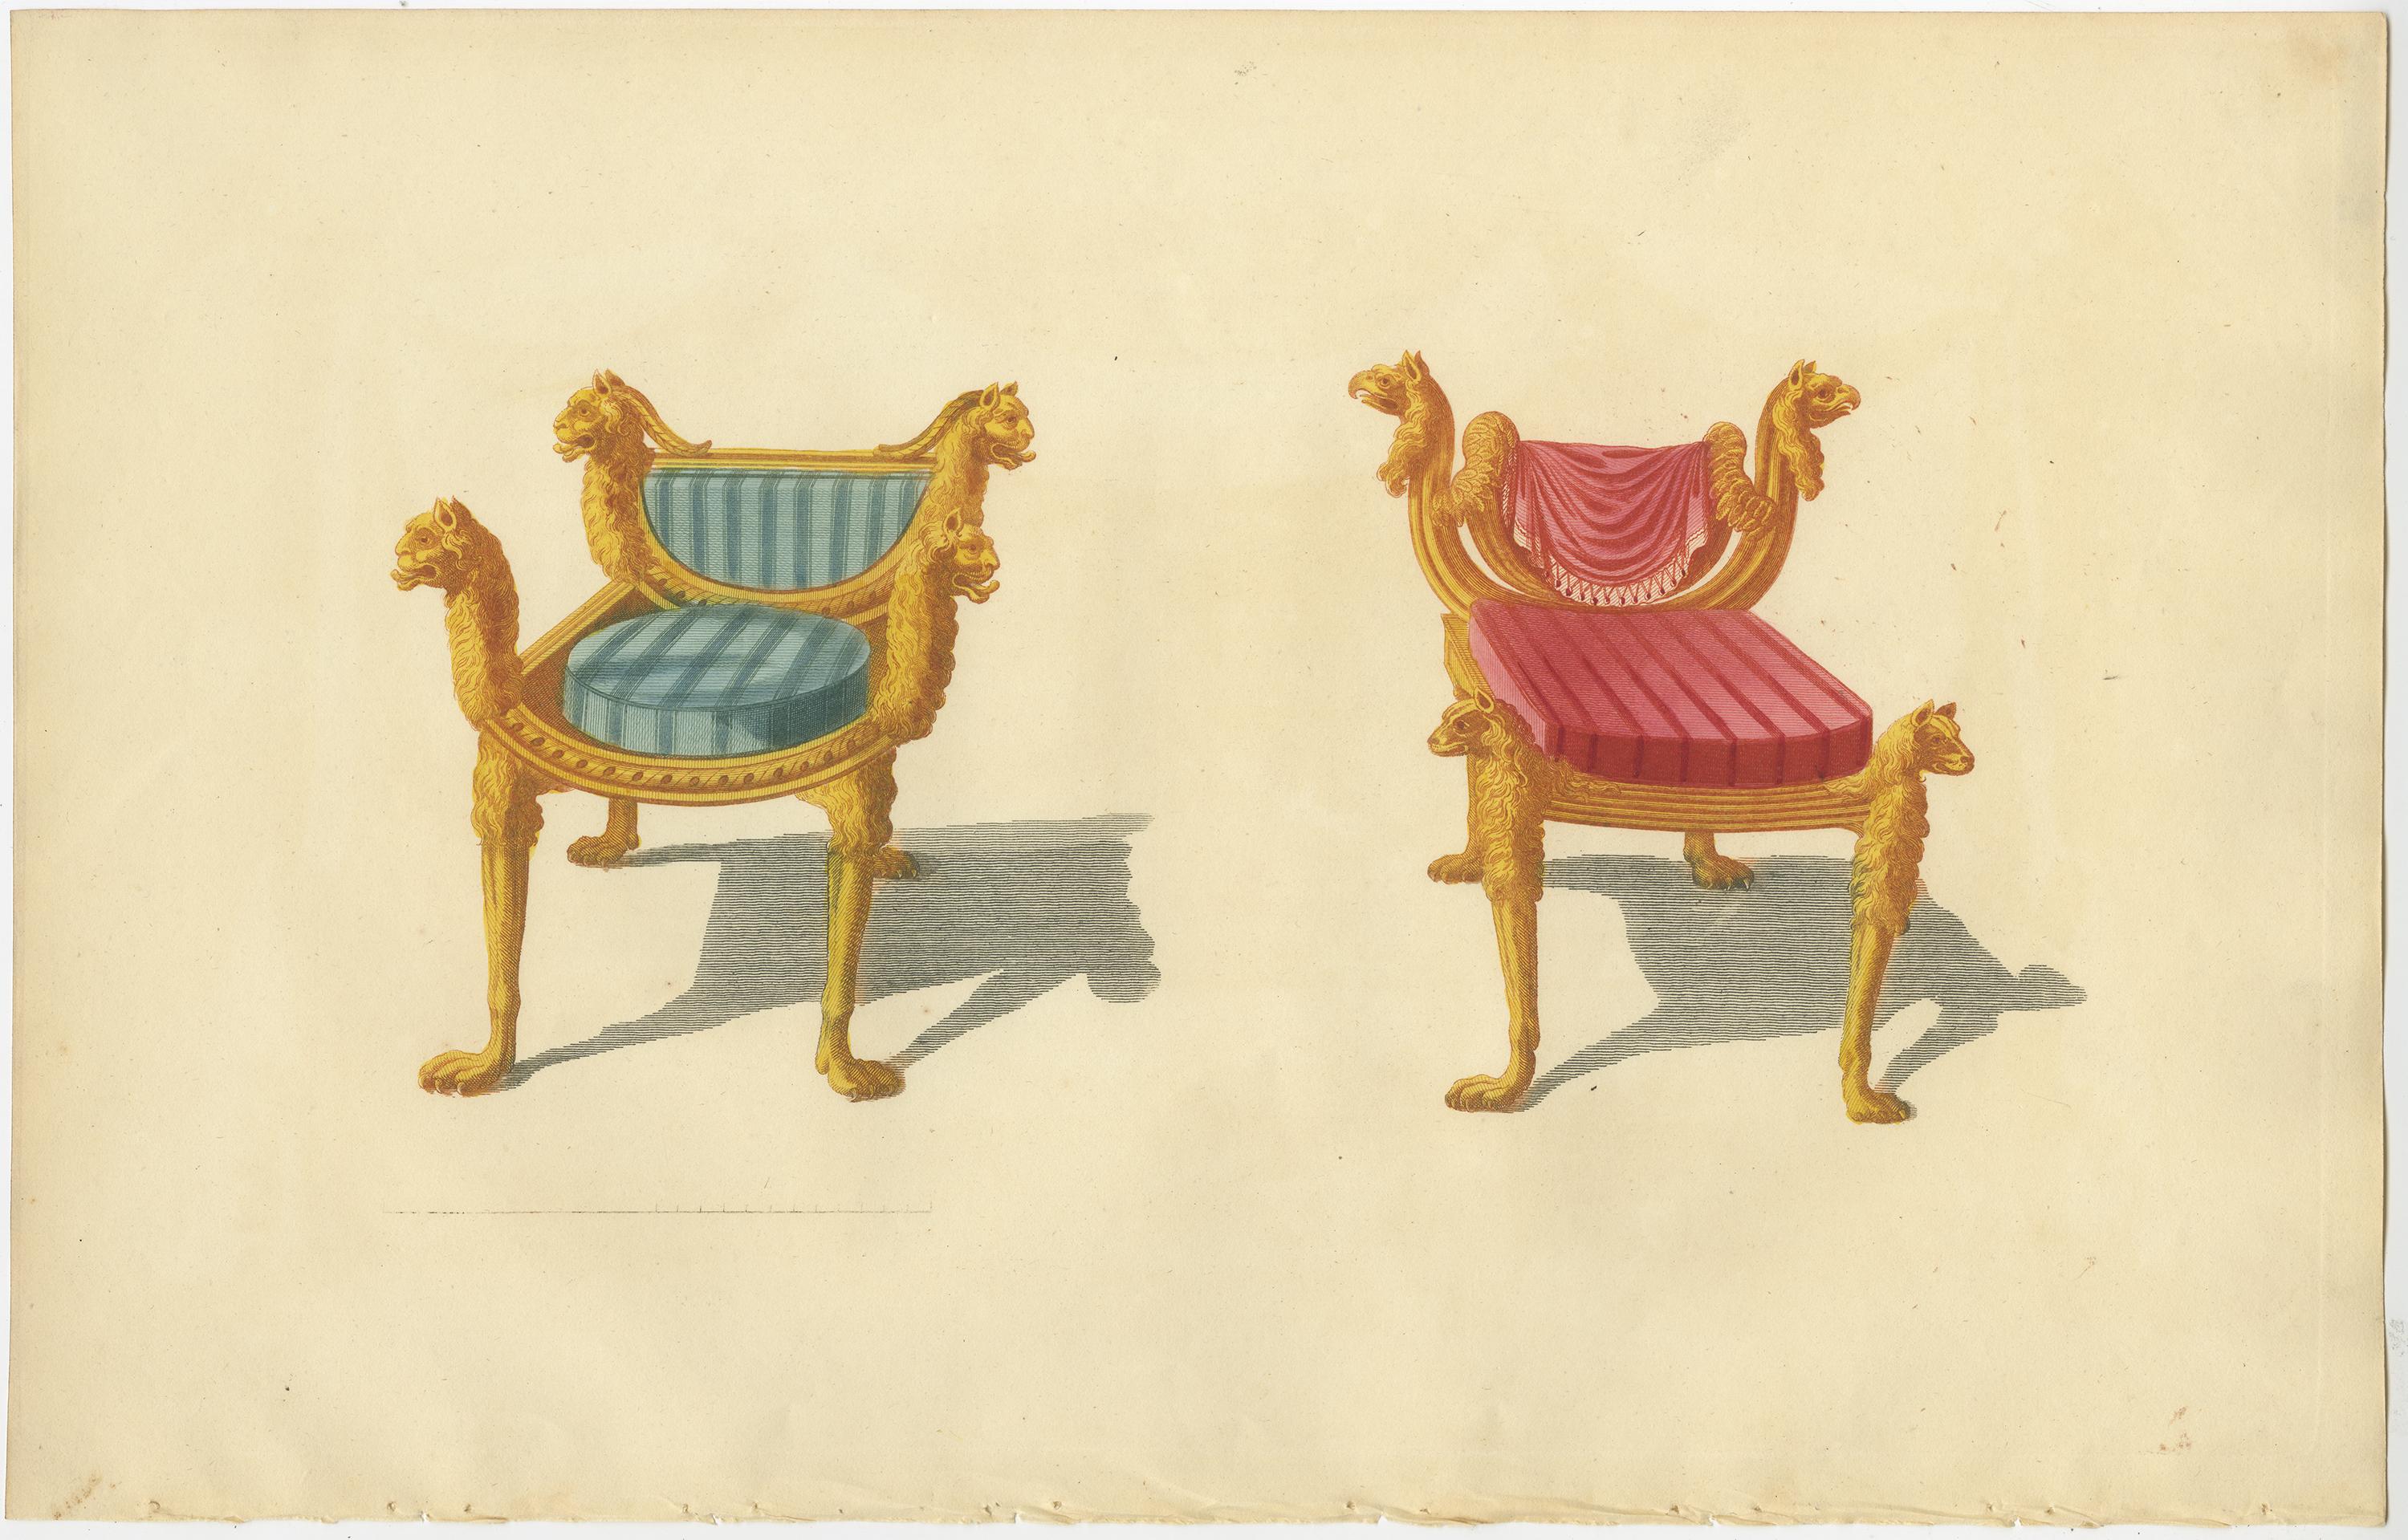 Set of five antique prints of various chairs. These prints originate from 'The General Artist's Encyclopaedia' by Thomas Sheraton. Published 1803-1805.